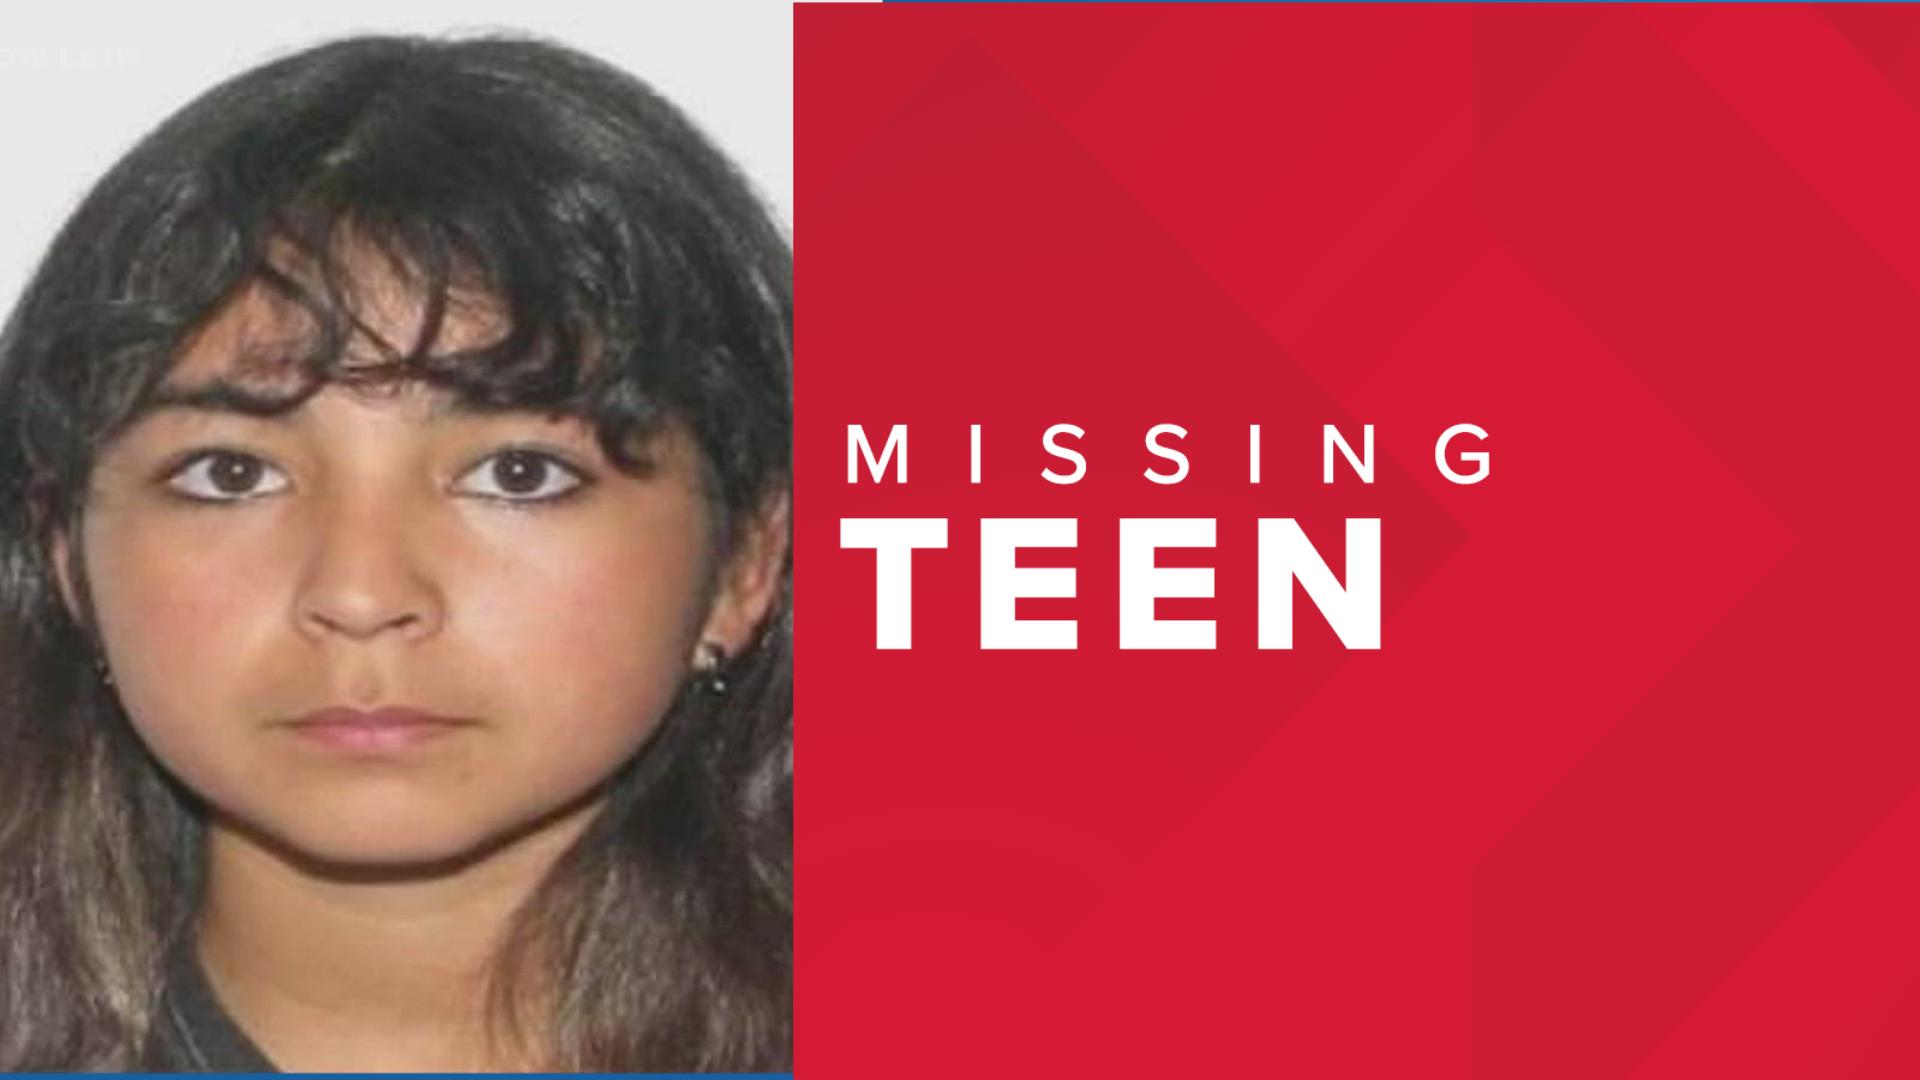 No one has seen 17-year-old Nevaeh Burciaga in more than two weeks.